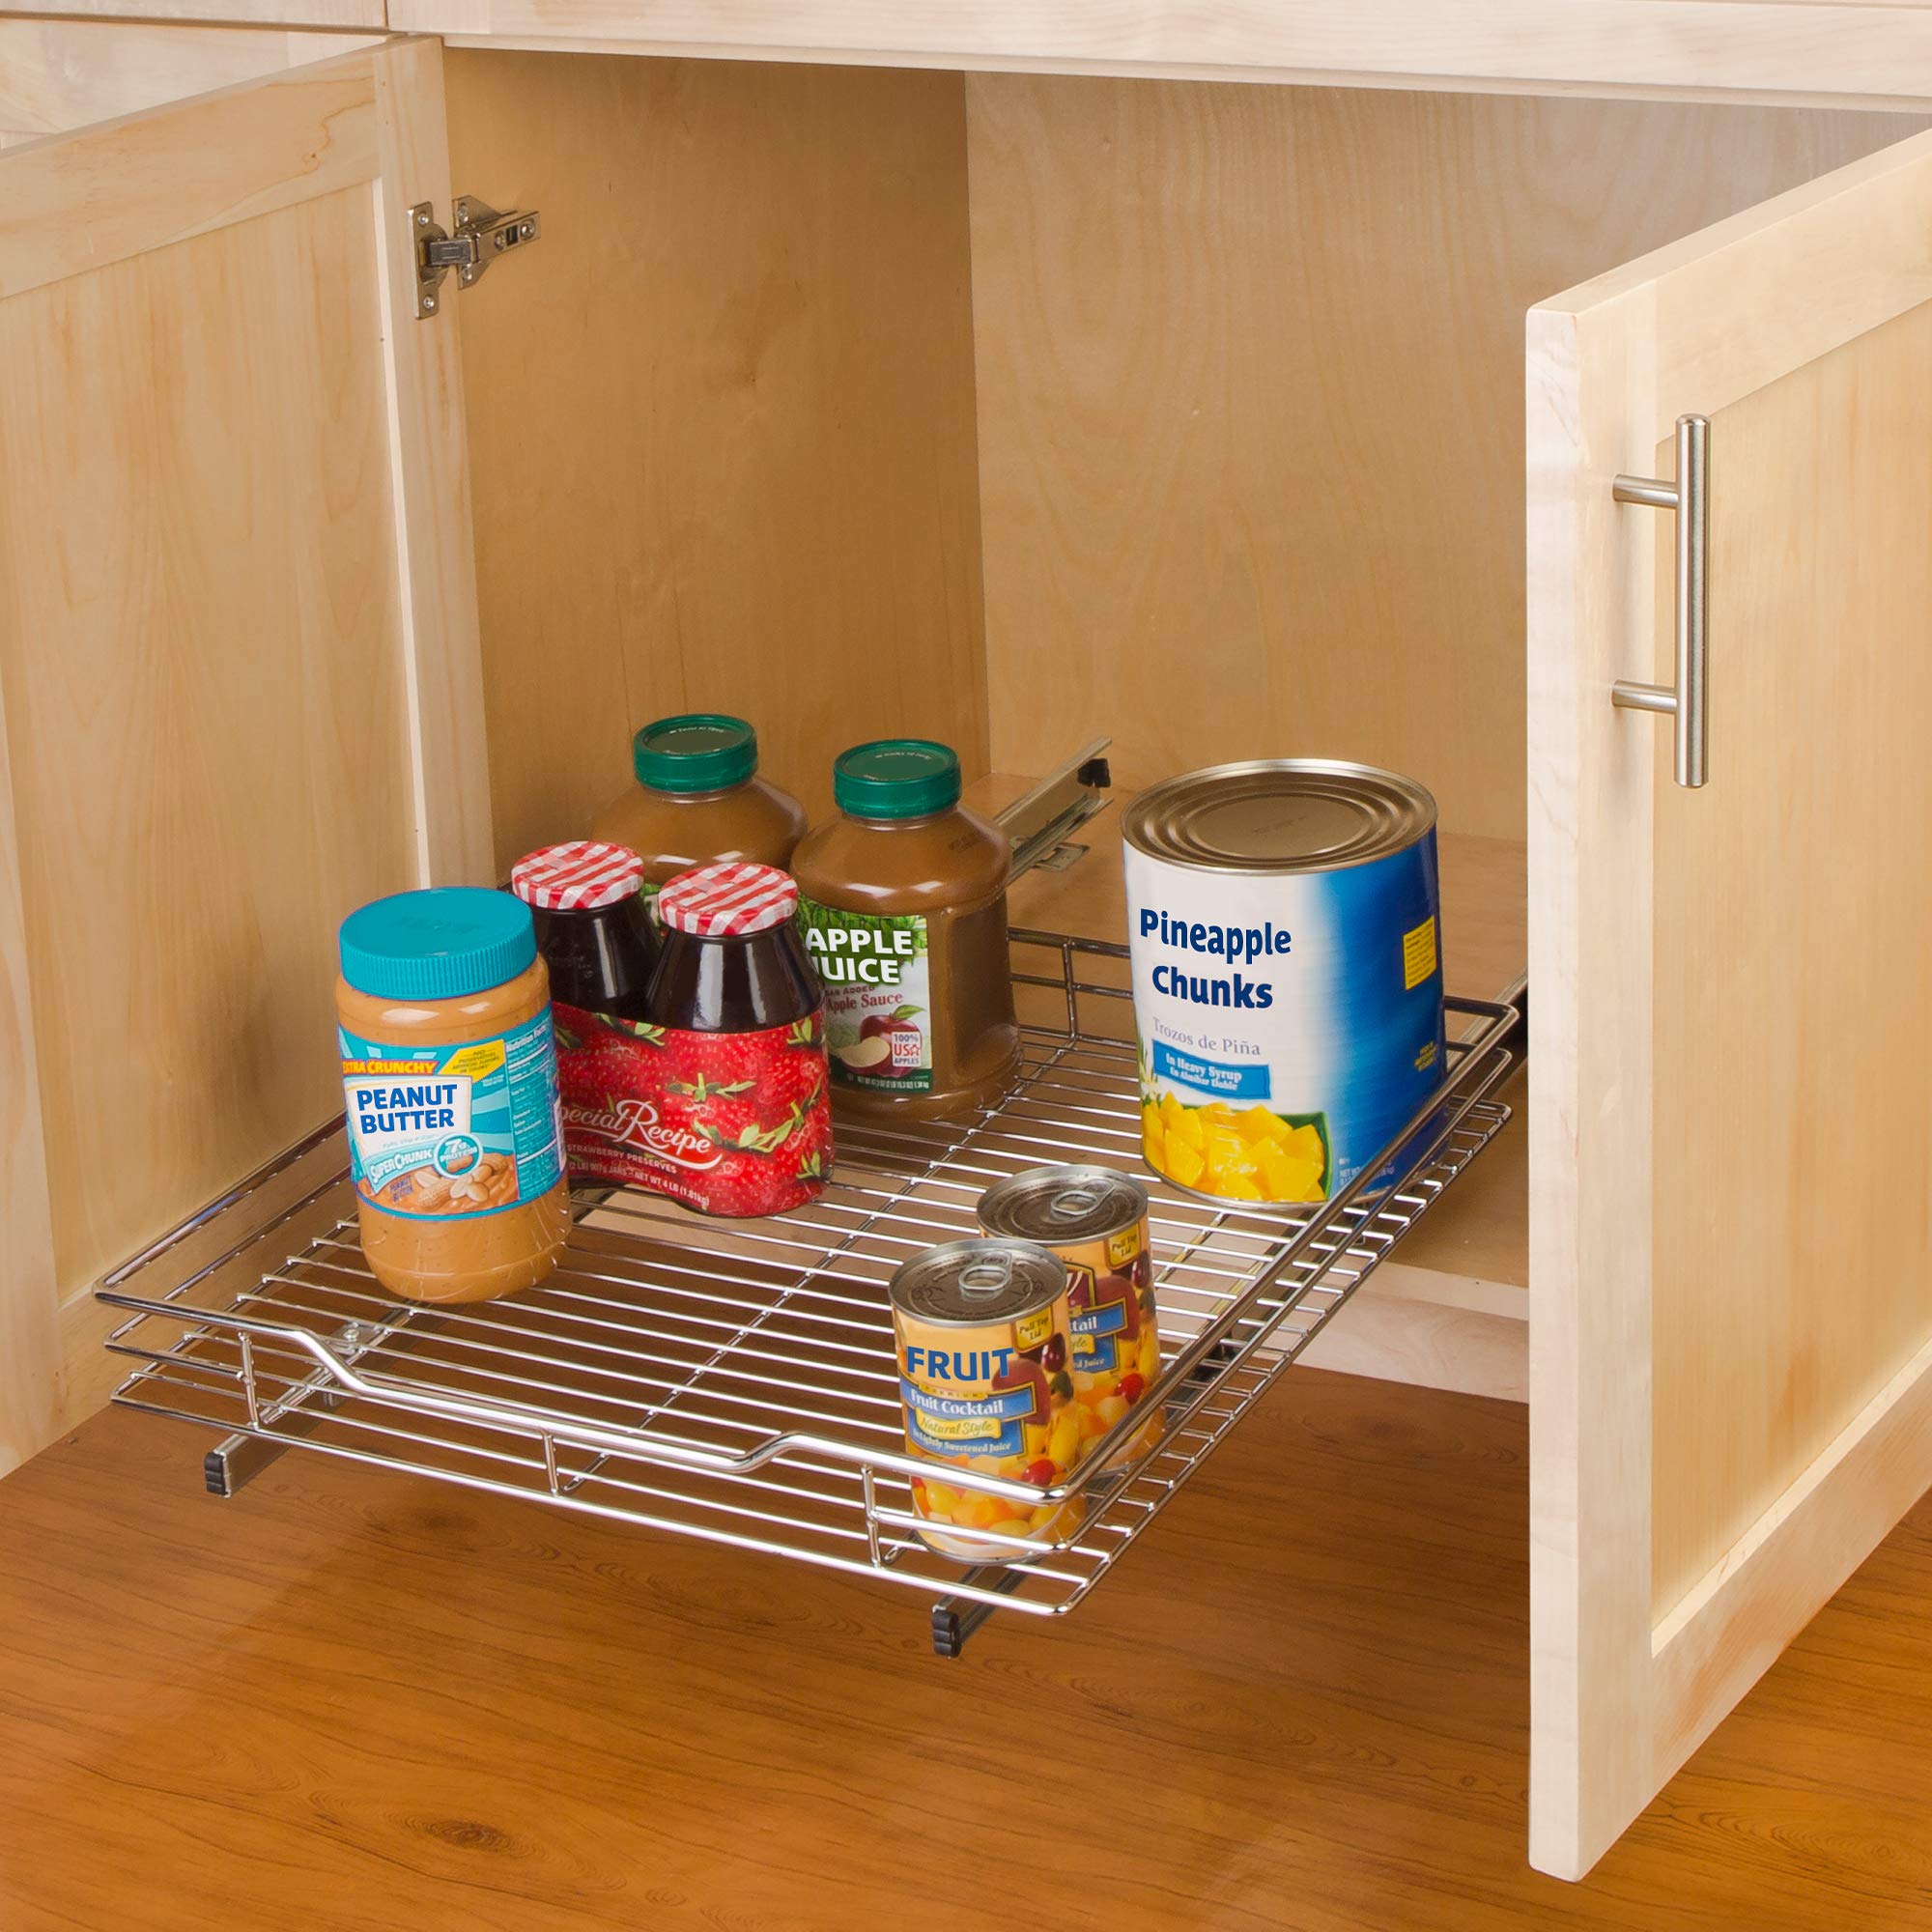 Galley Kitchen Pull-Out Cupboard Organiser Suits 300mm